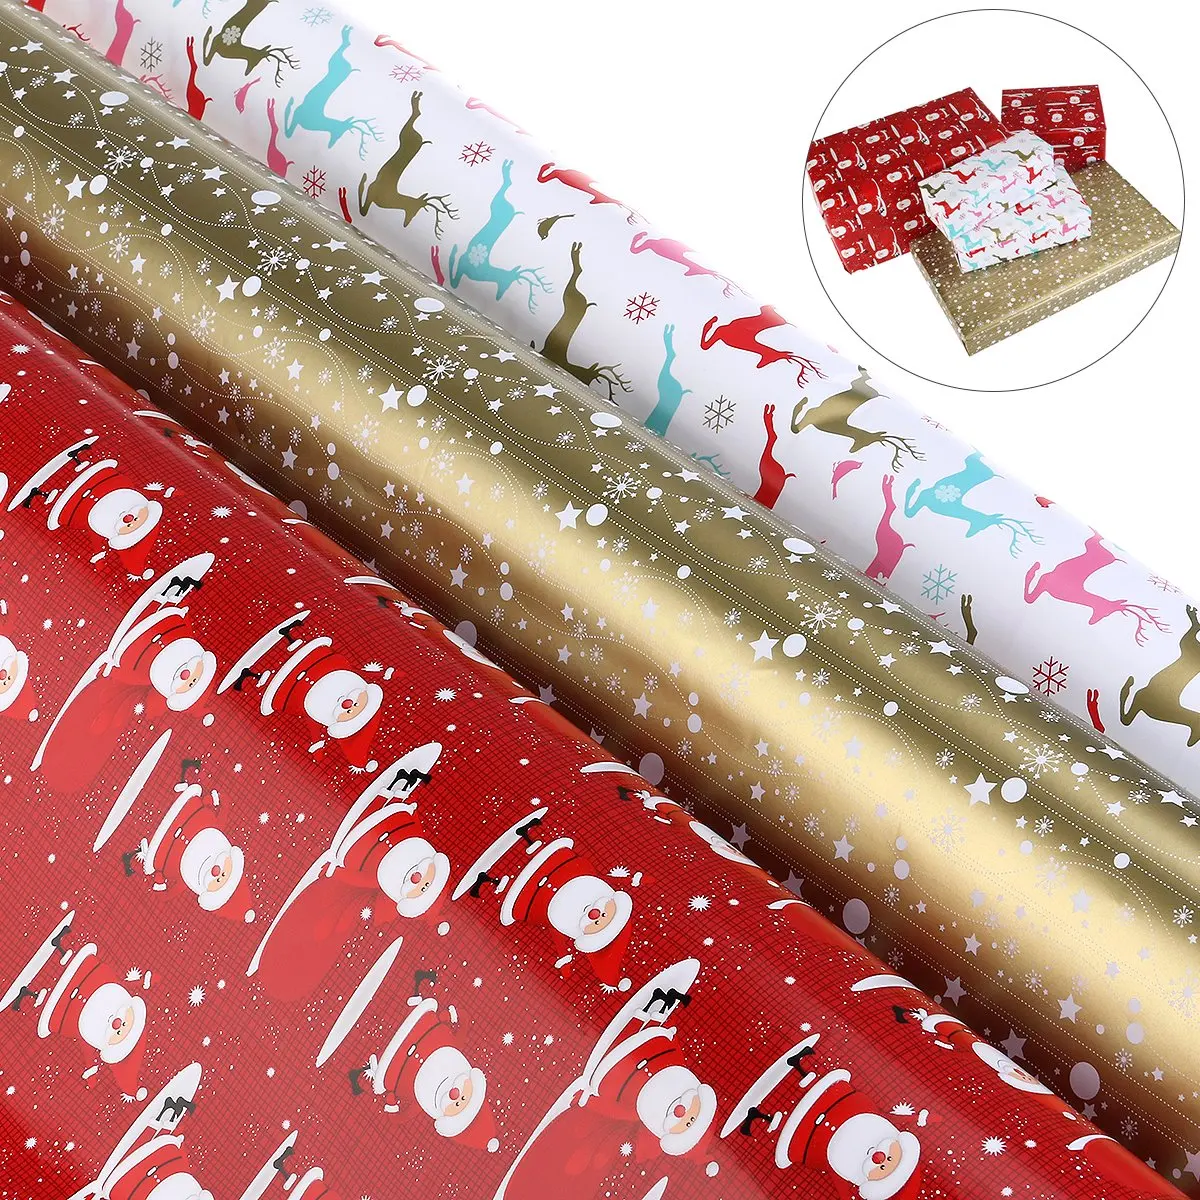 Cheap Christmas Gift Wrapping Paper Shop, find Christmas Gift Wrapping